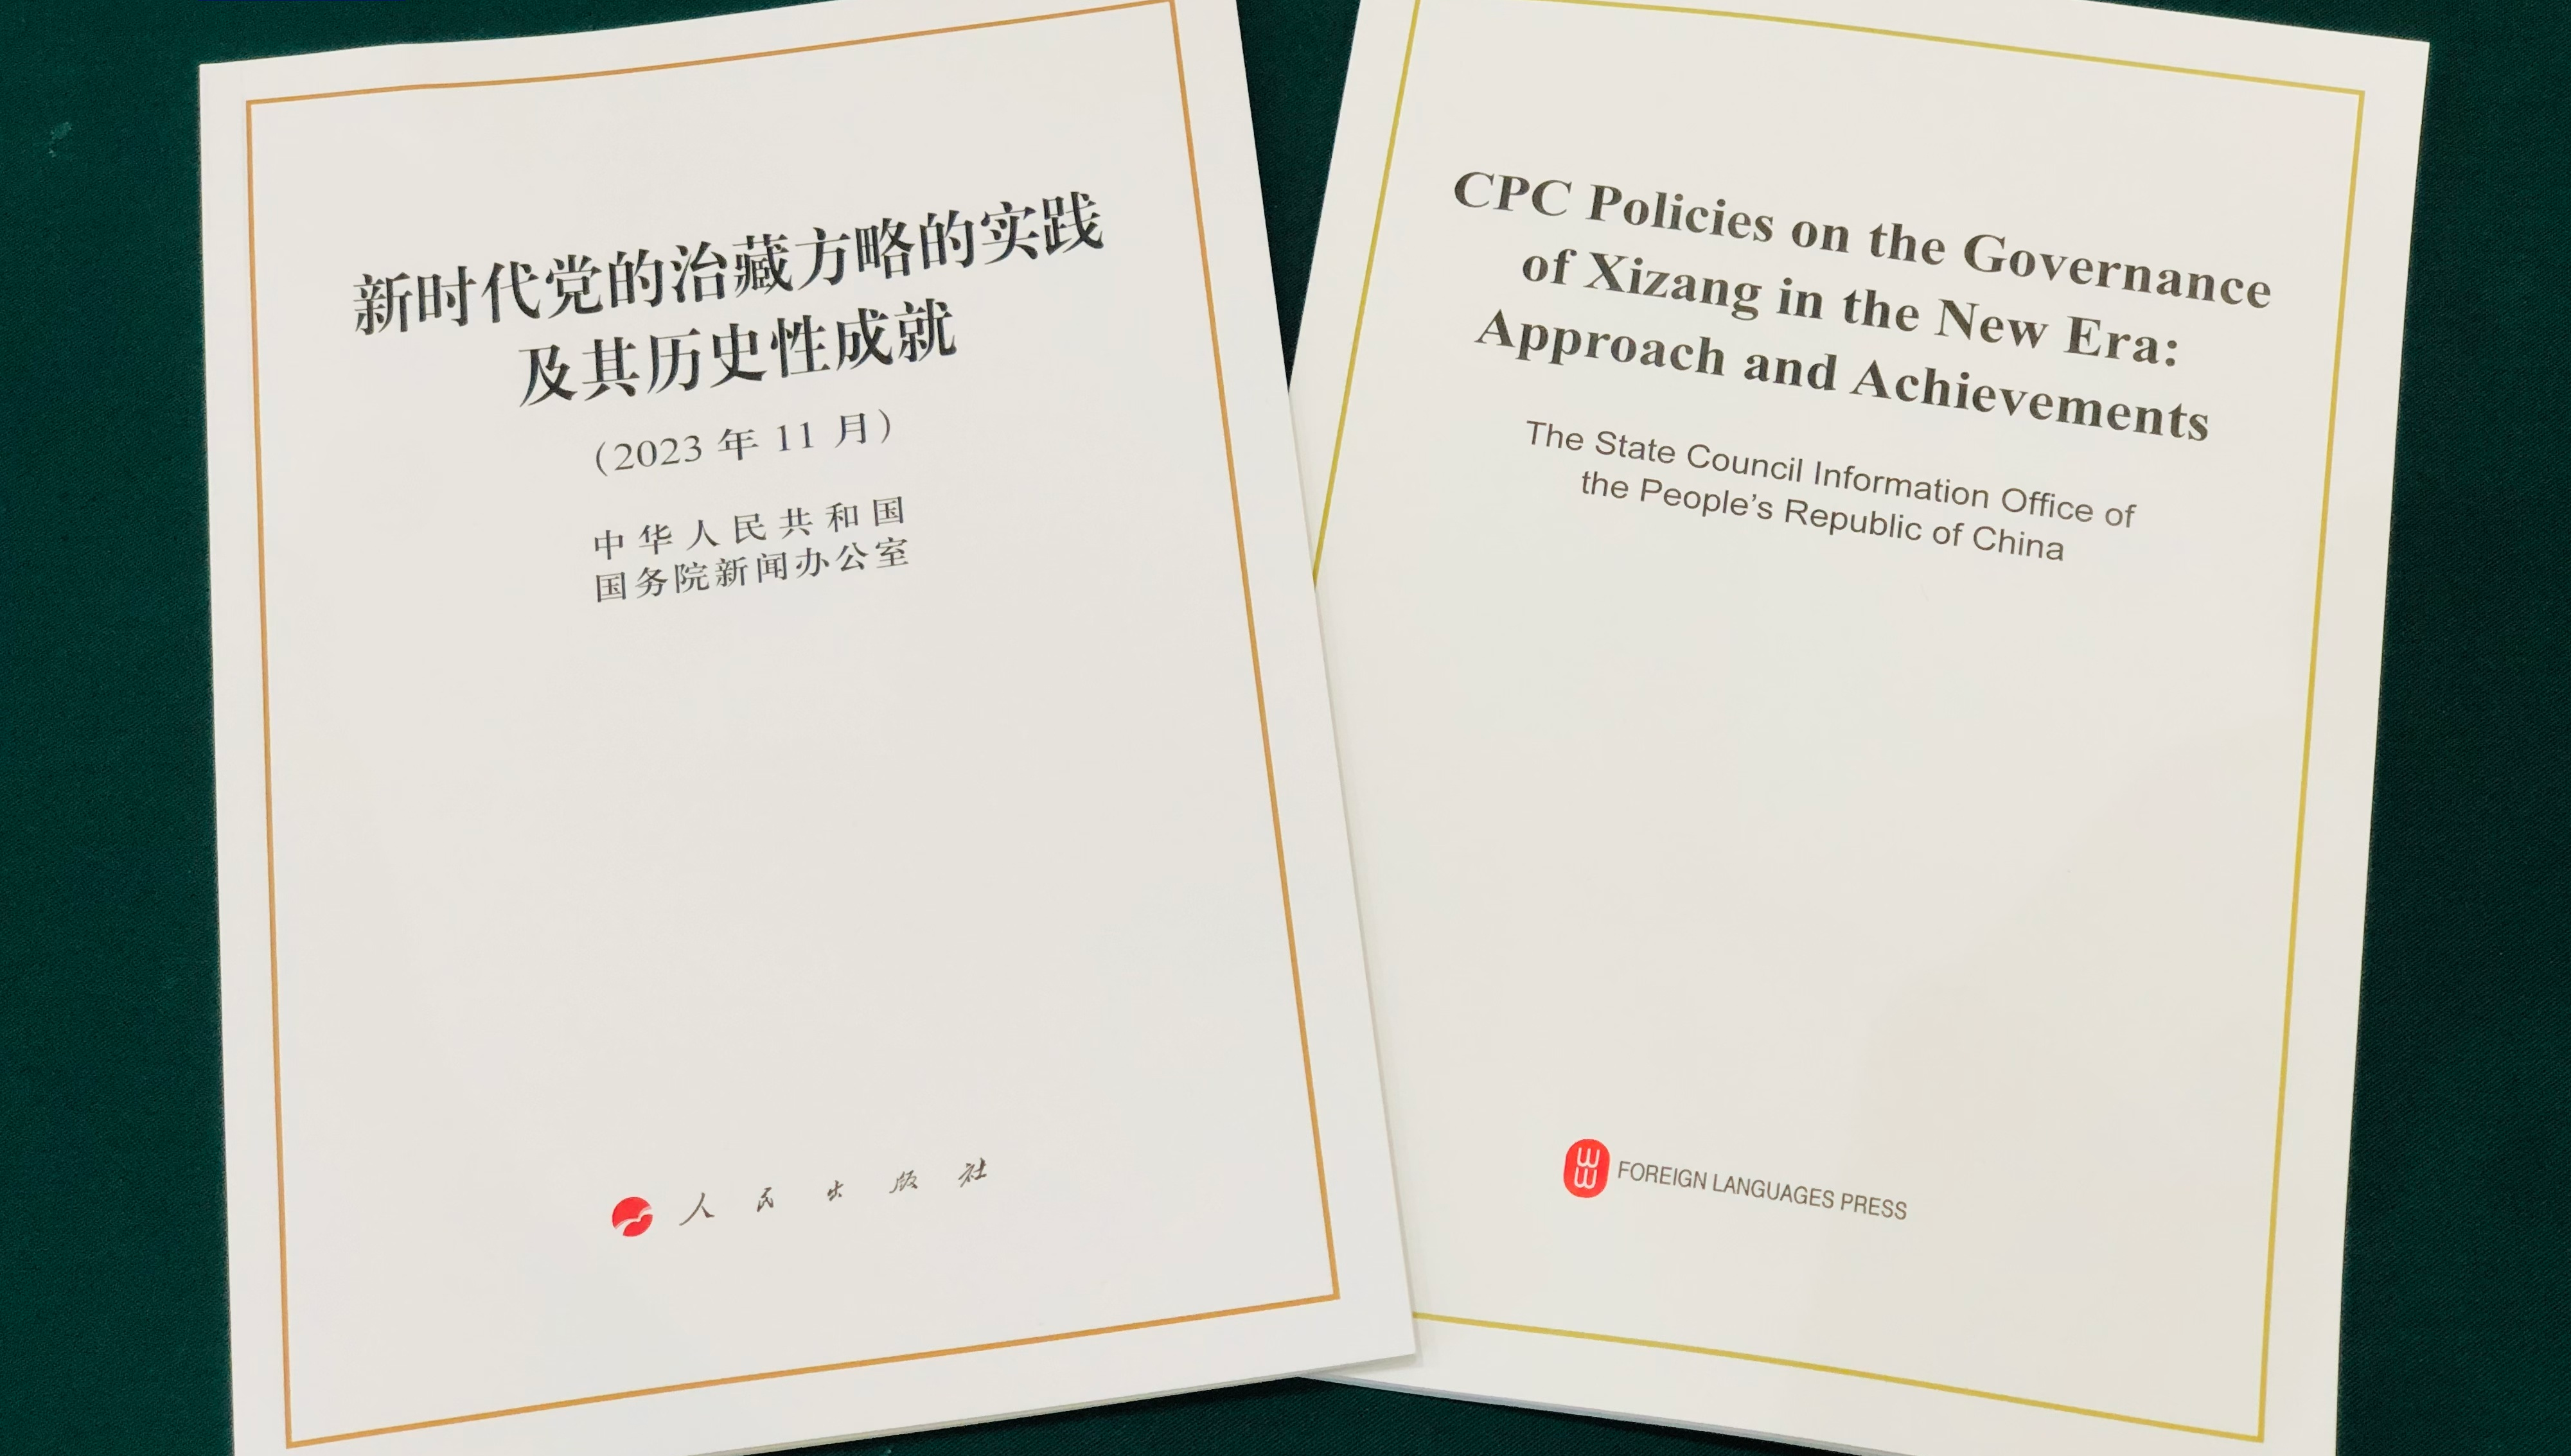 China issues white paper on CPC policies on governance of Xizang in new era